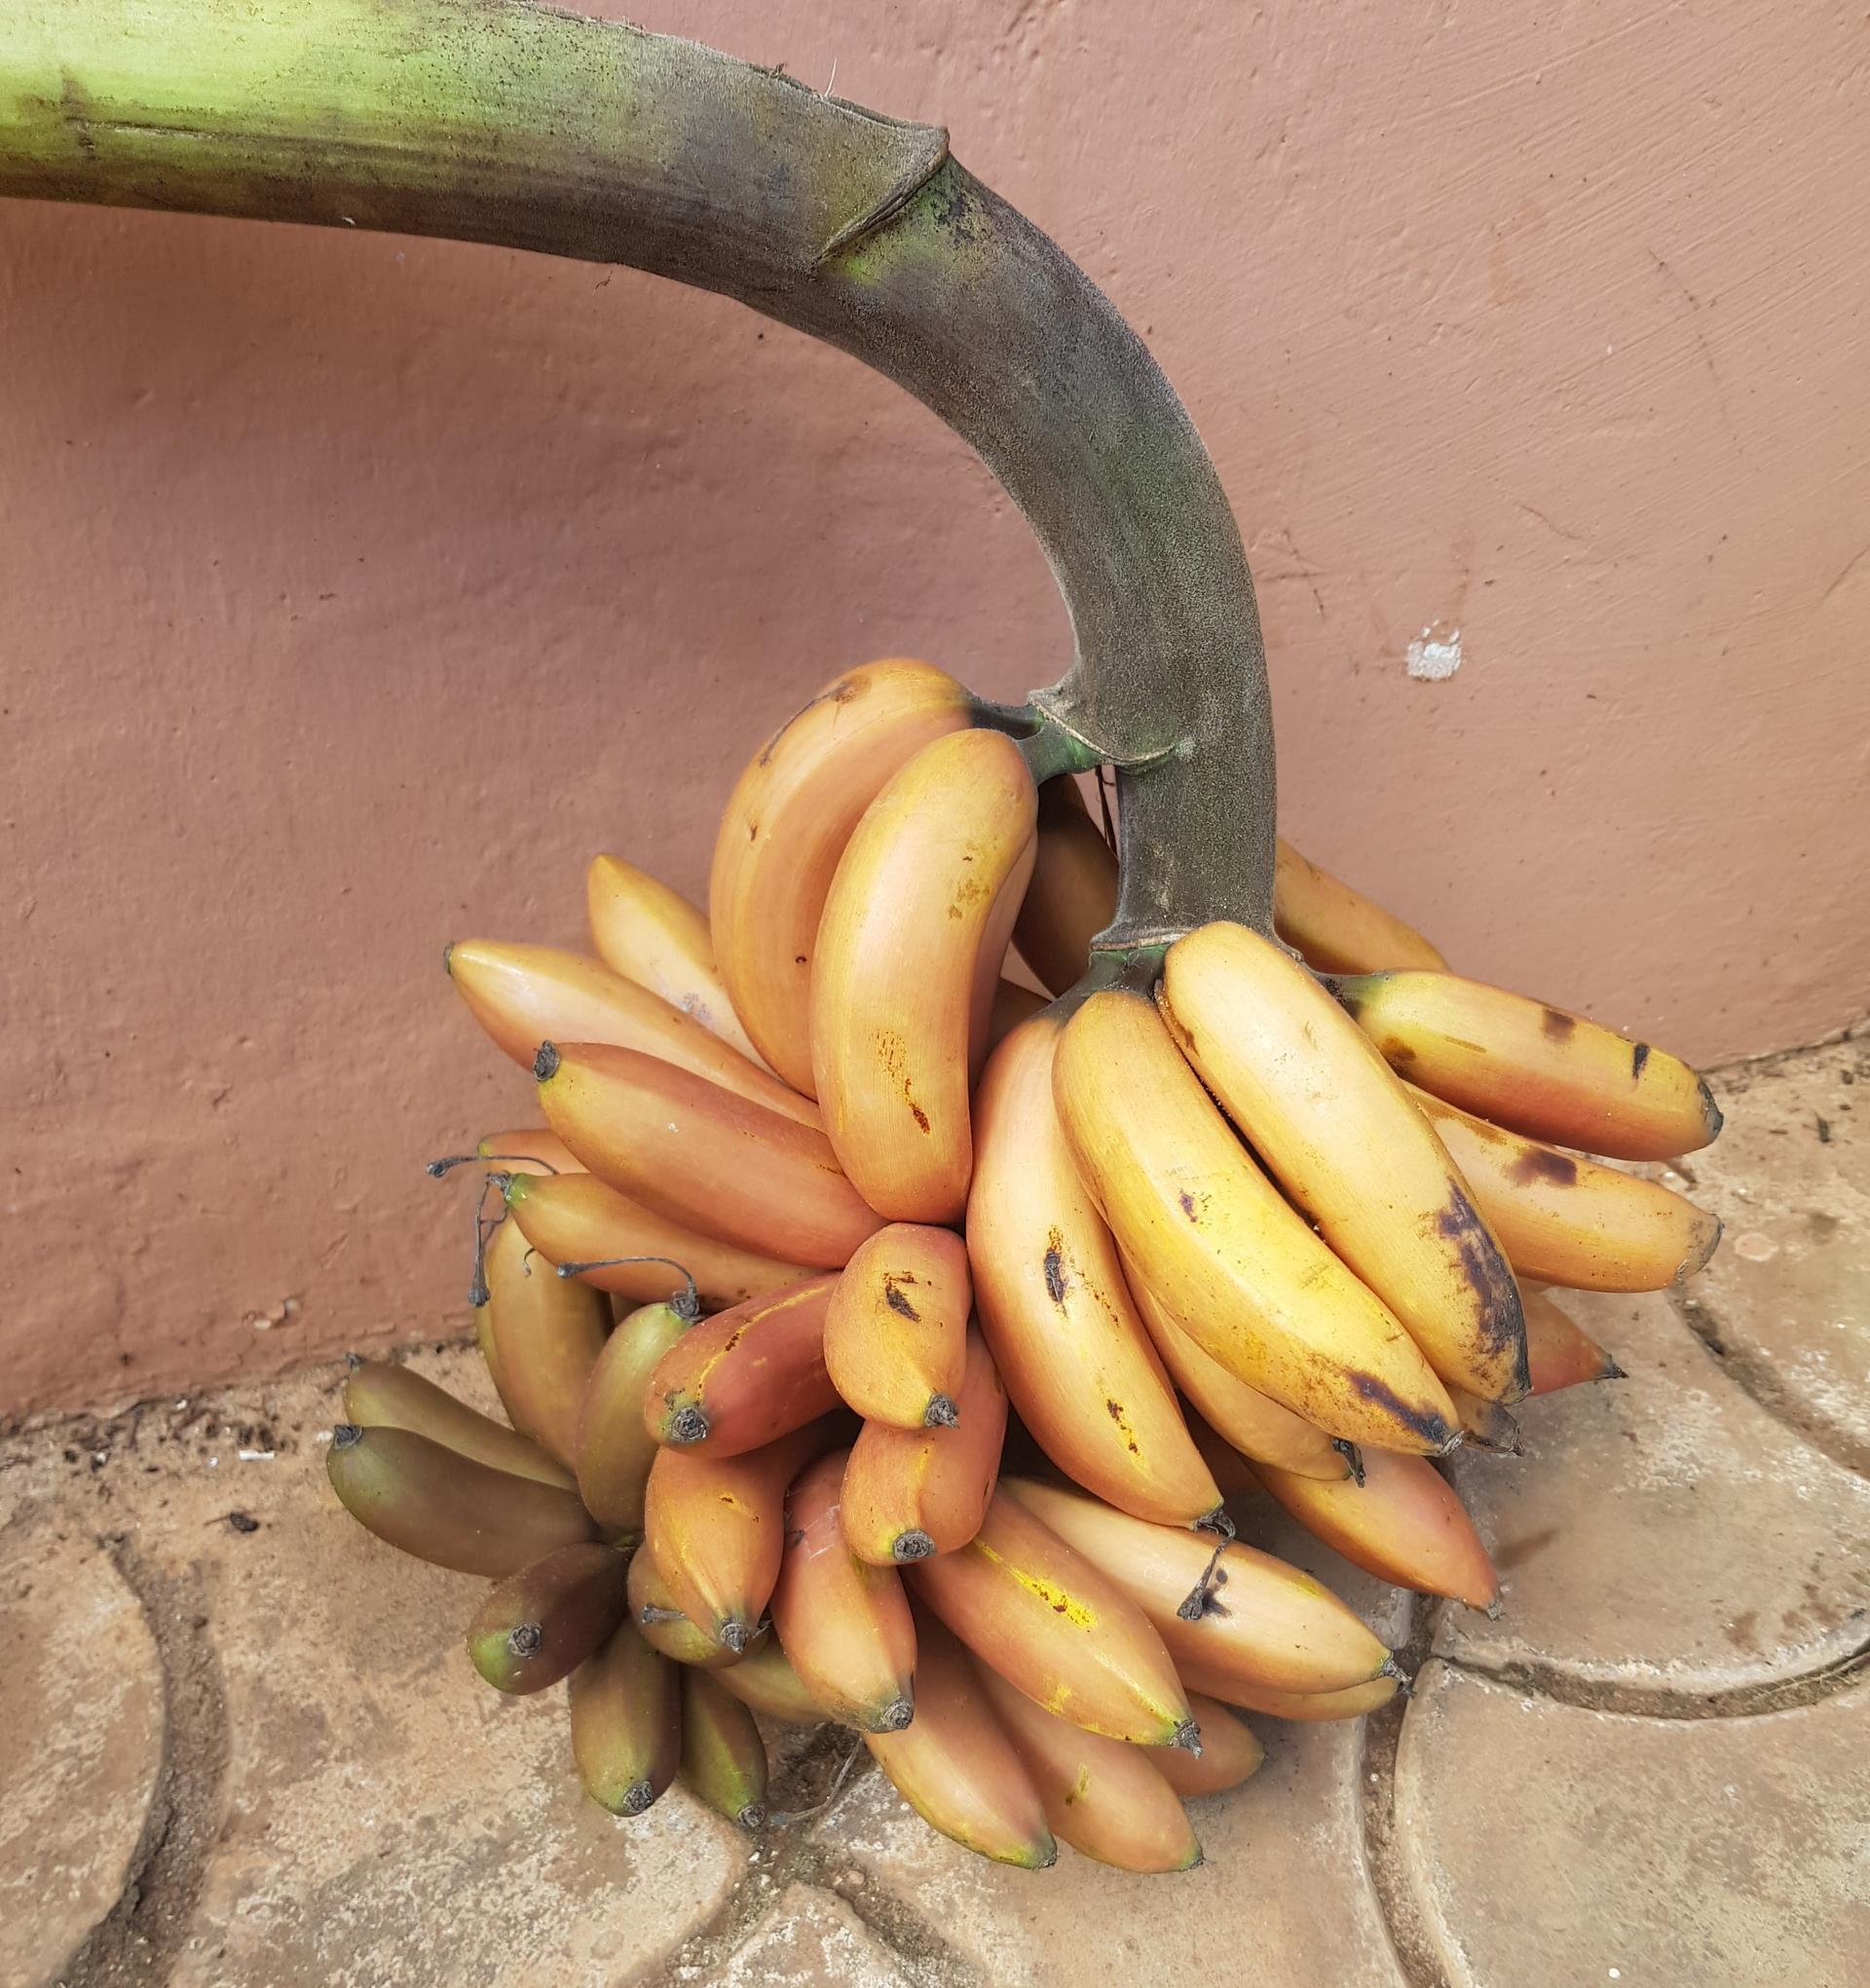 Planting Hope, Harvesting Health Combating Vitamin A Deficiency in East Africa with Nutrient-Rich Bananas - Alliance Bioversity International - CIAT - Image three